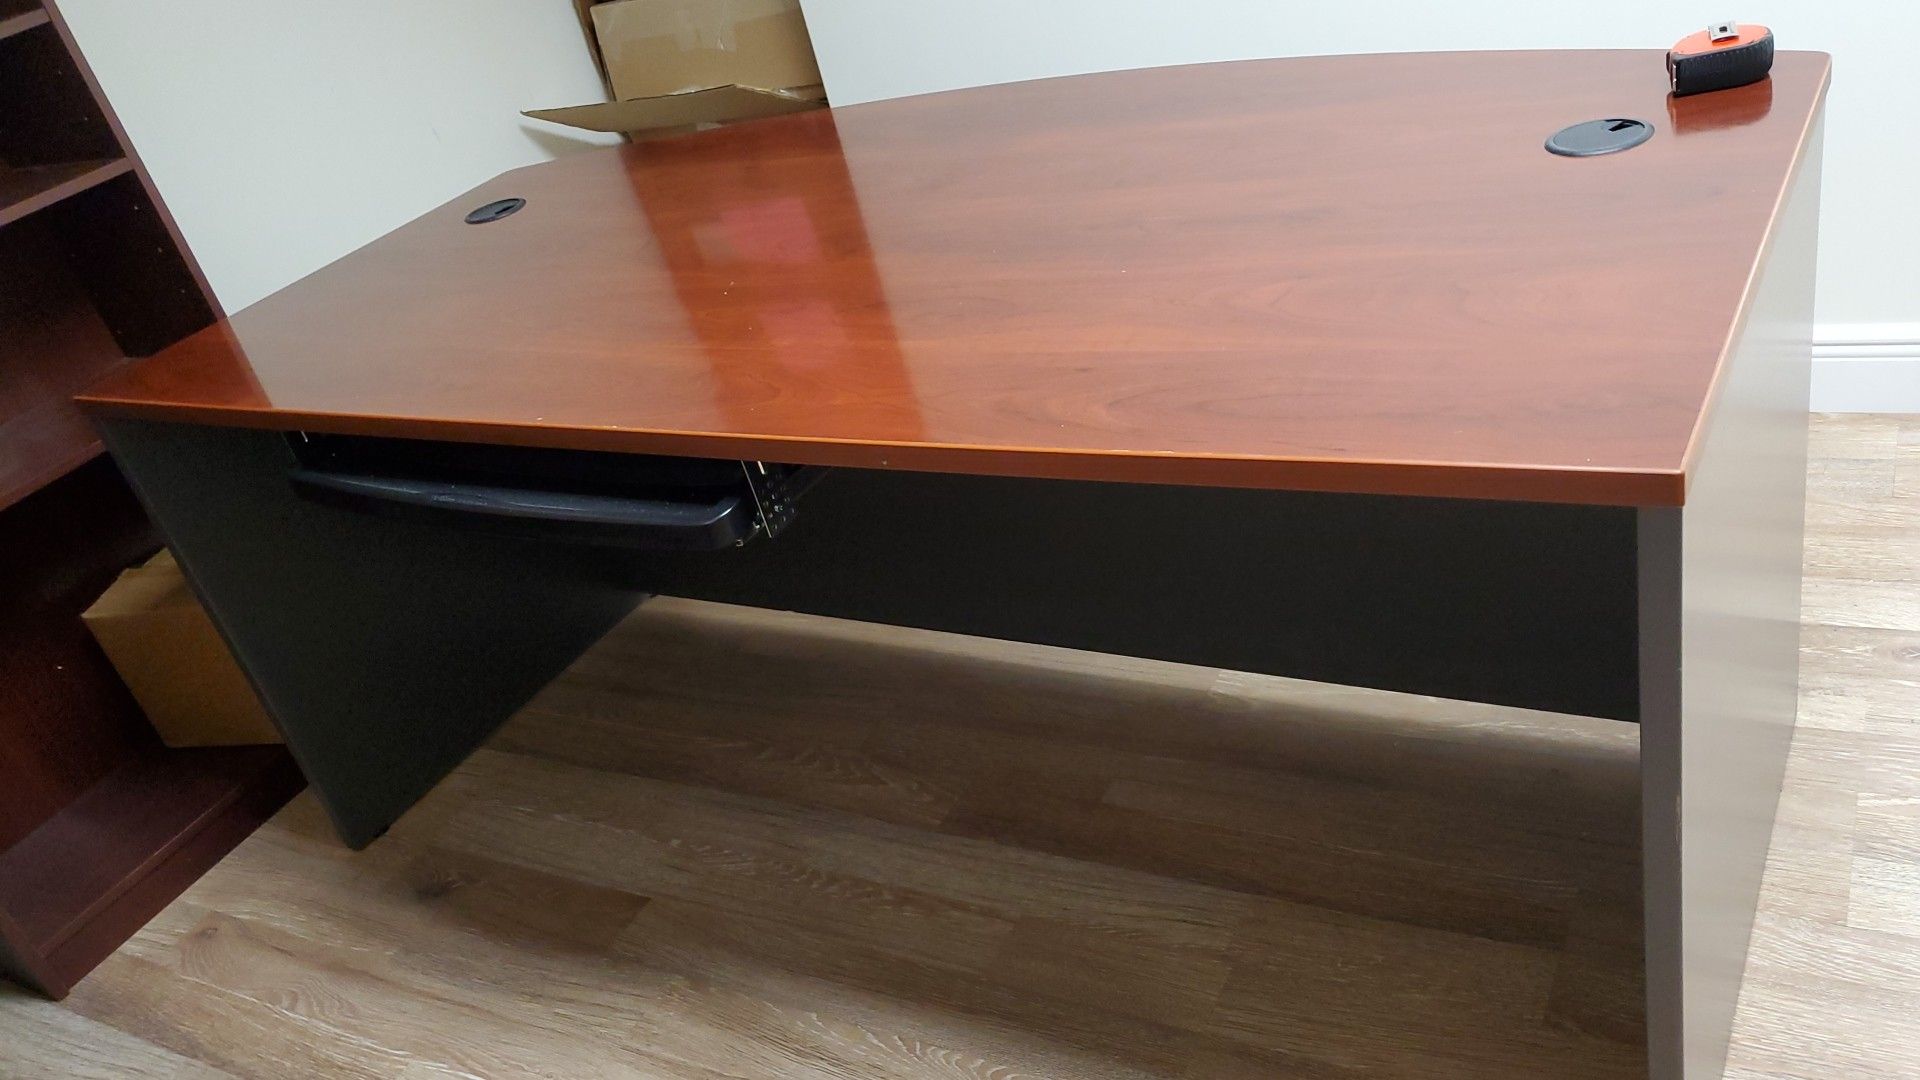 Extra large Cherry topped desk